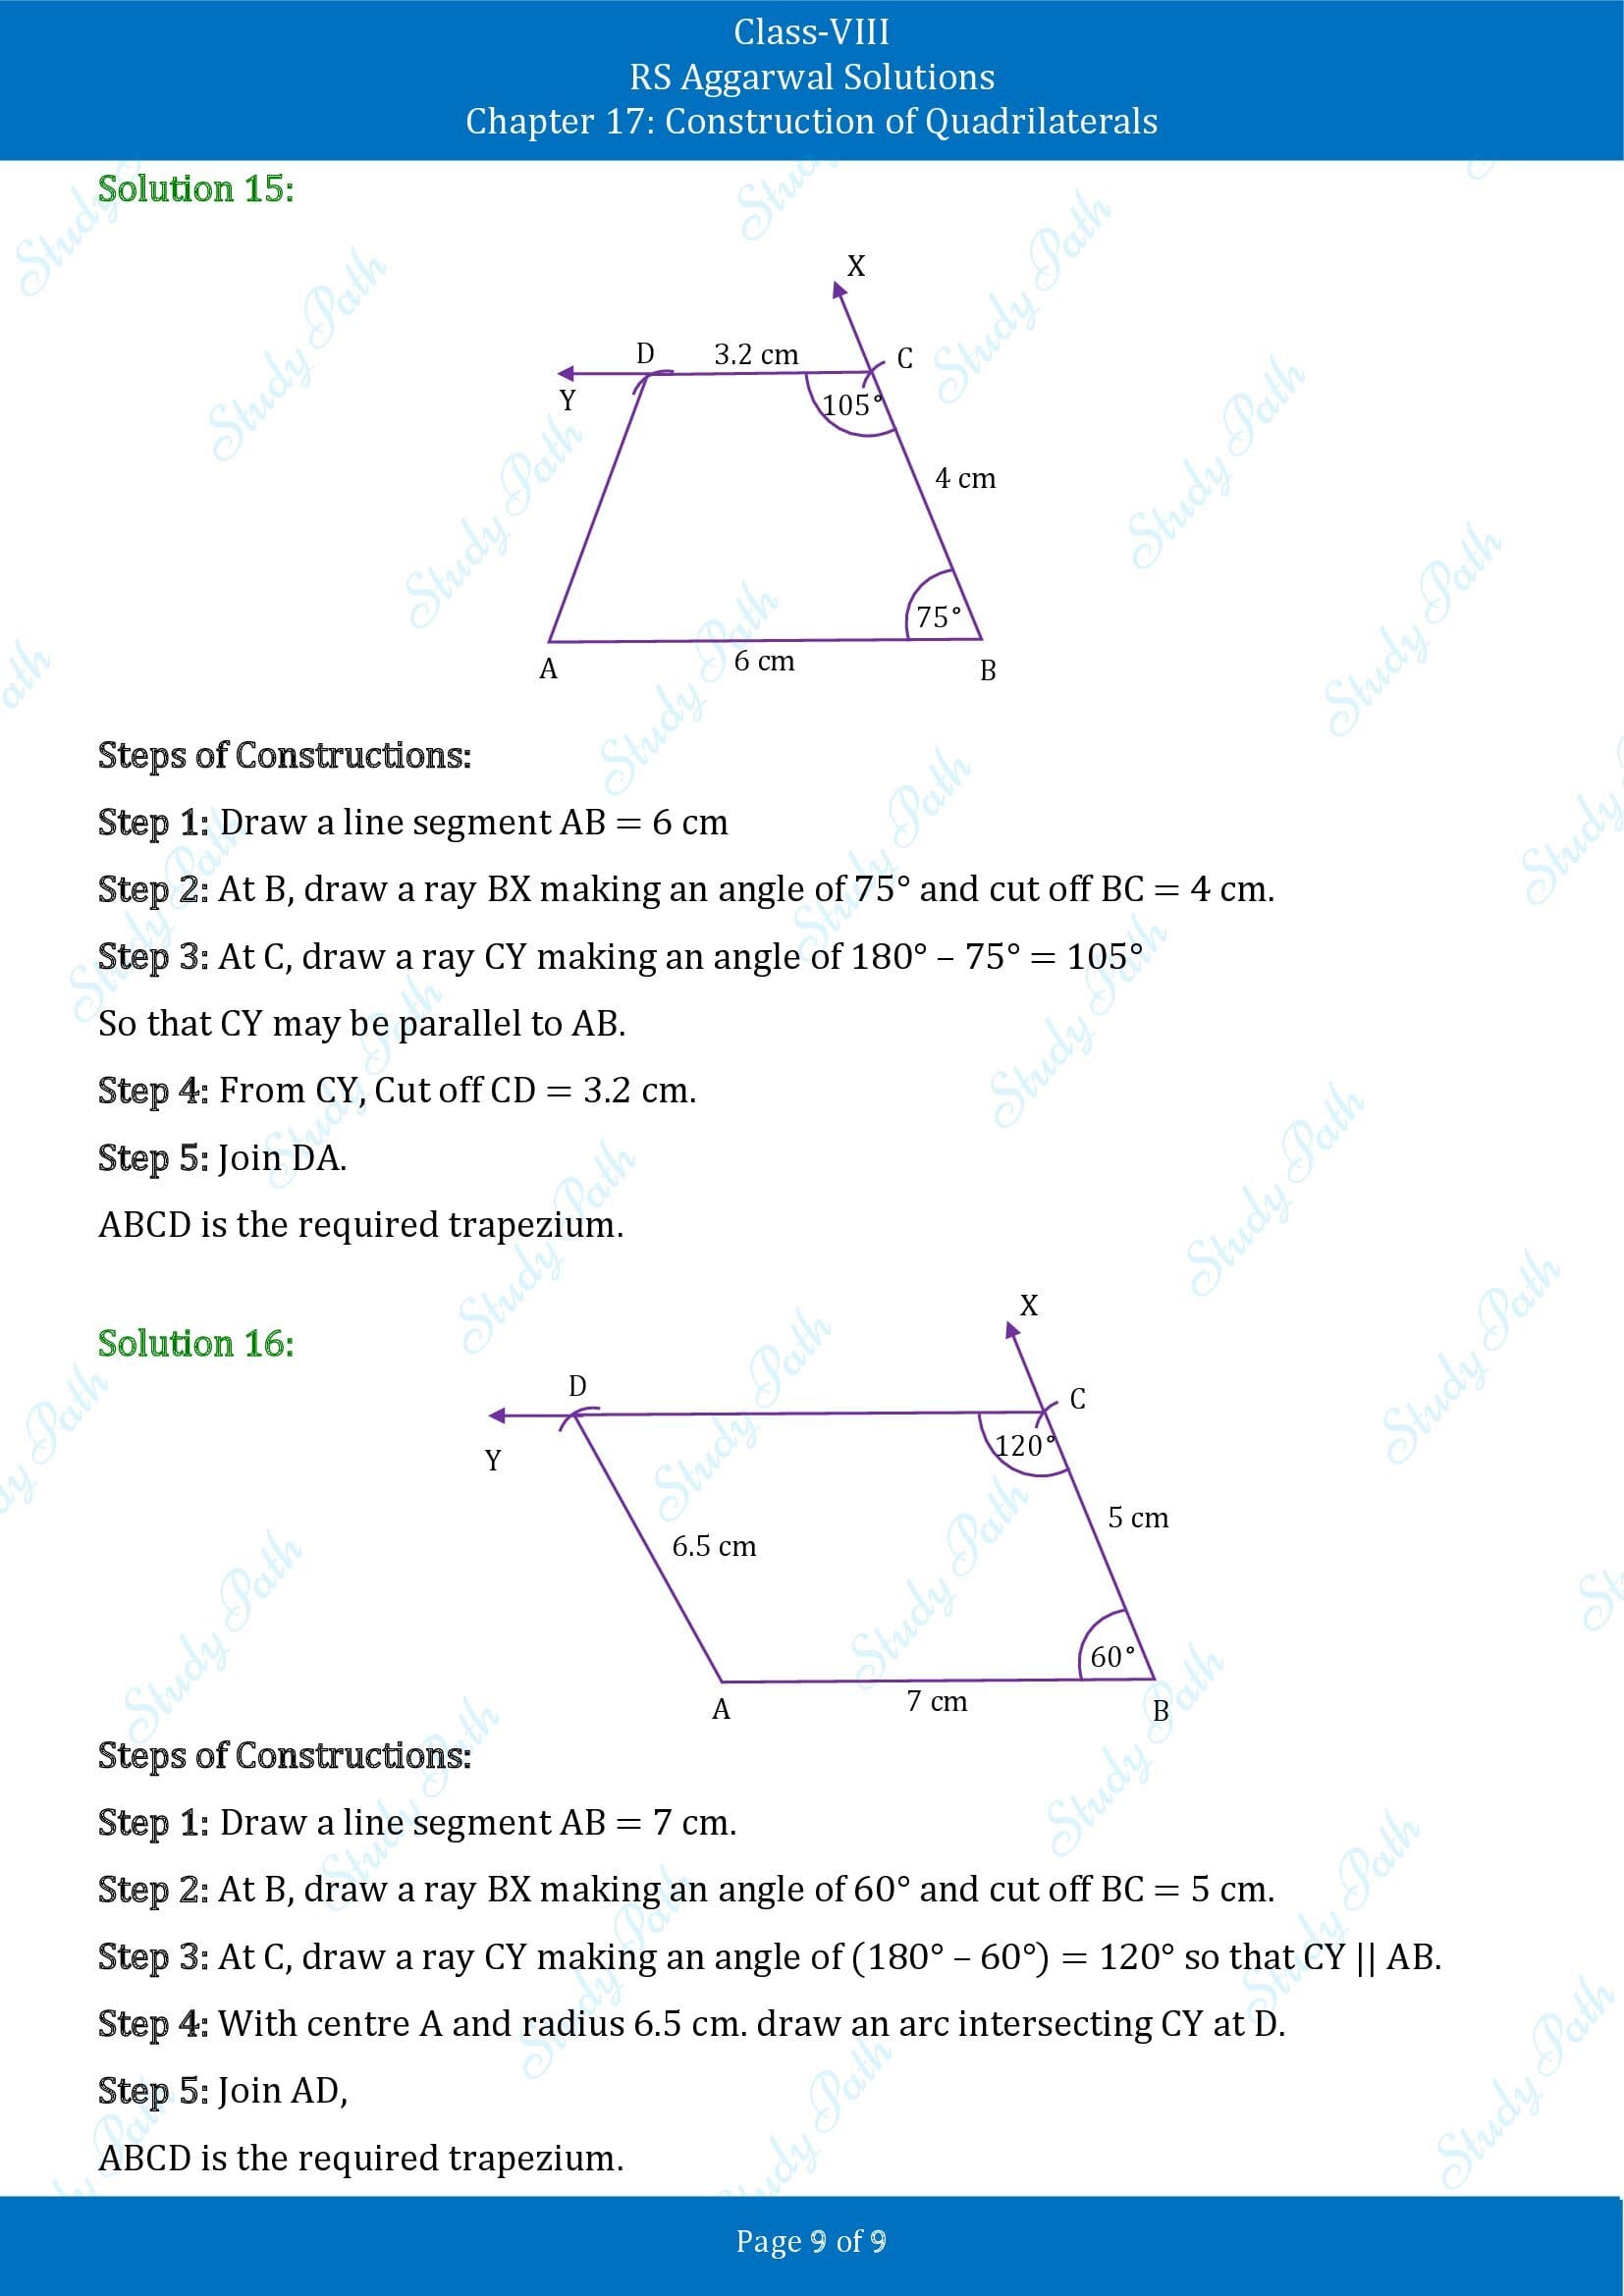 RS Aggarwal Solutions Class 8 Chapter 17 Construction of Quadrilaterals Exercise 17B 00009